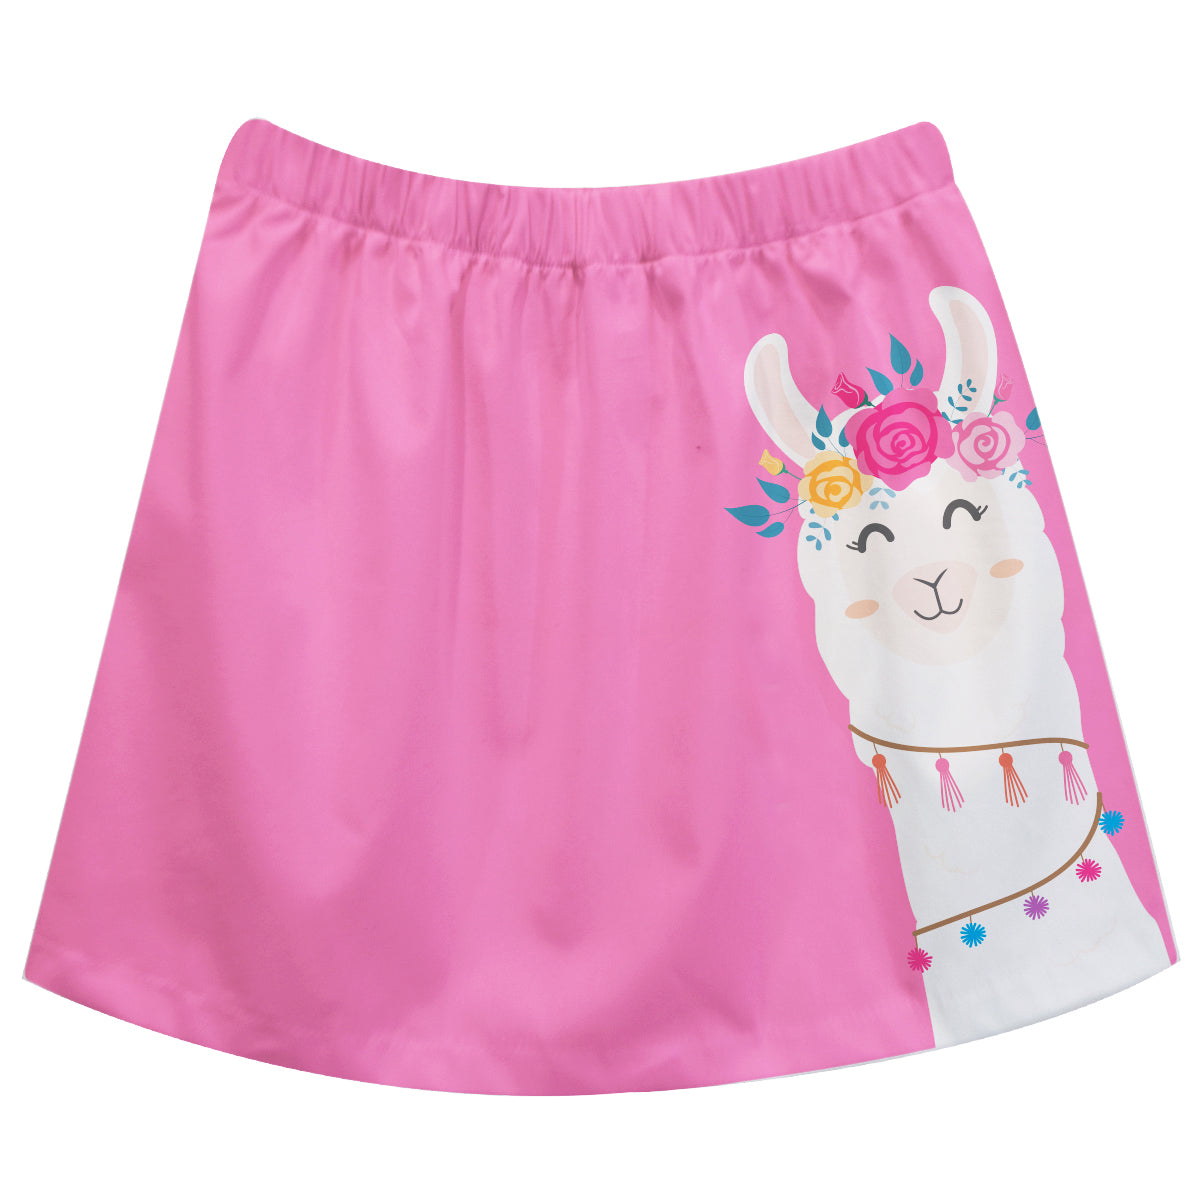 Pink and white llama girls skirt with name – Wimziy&Co.